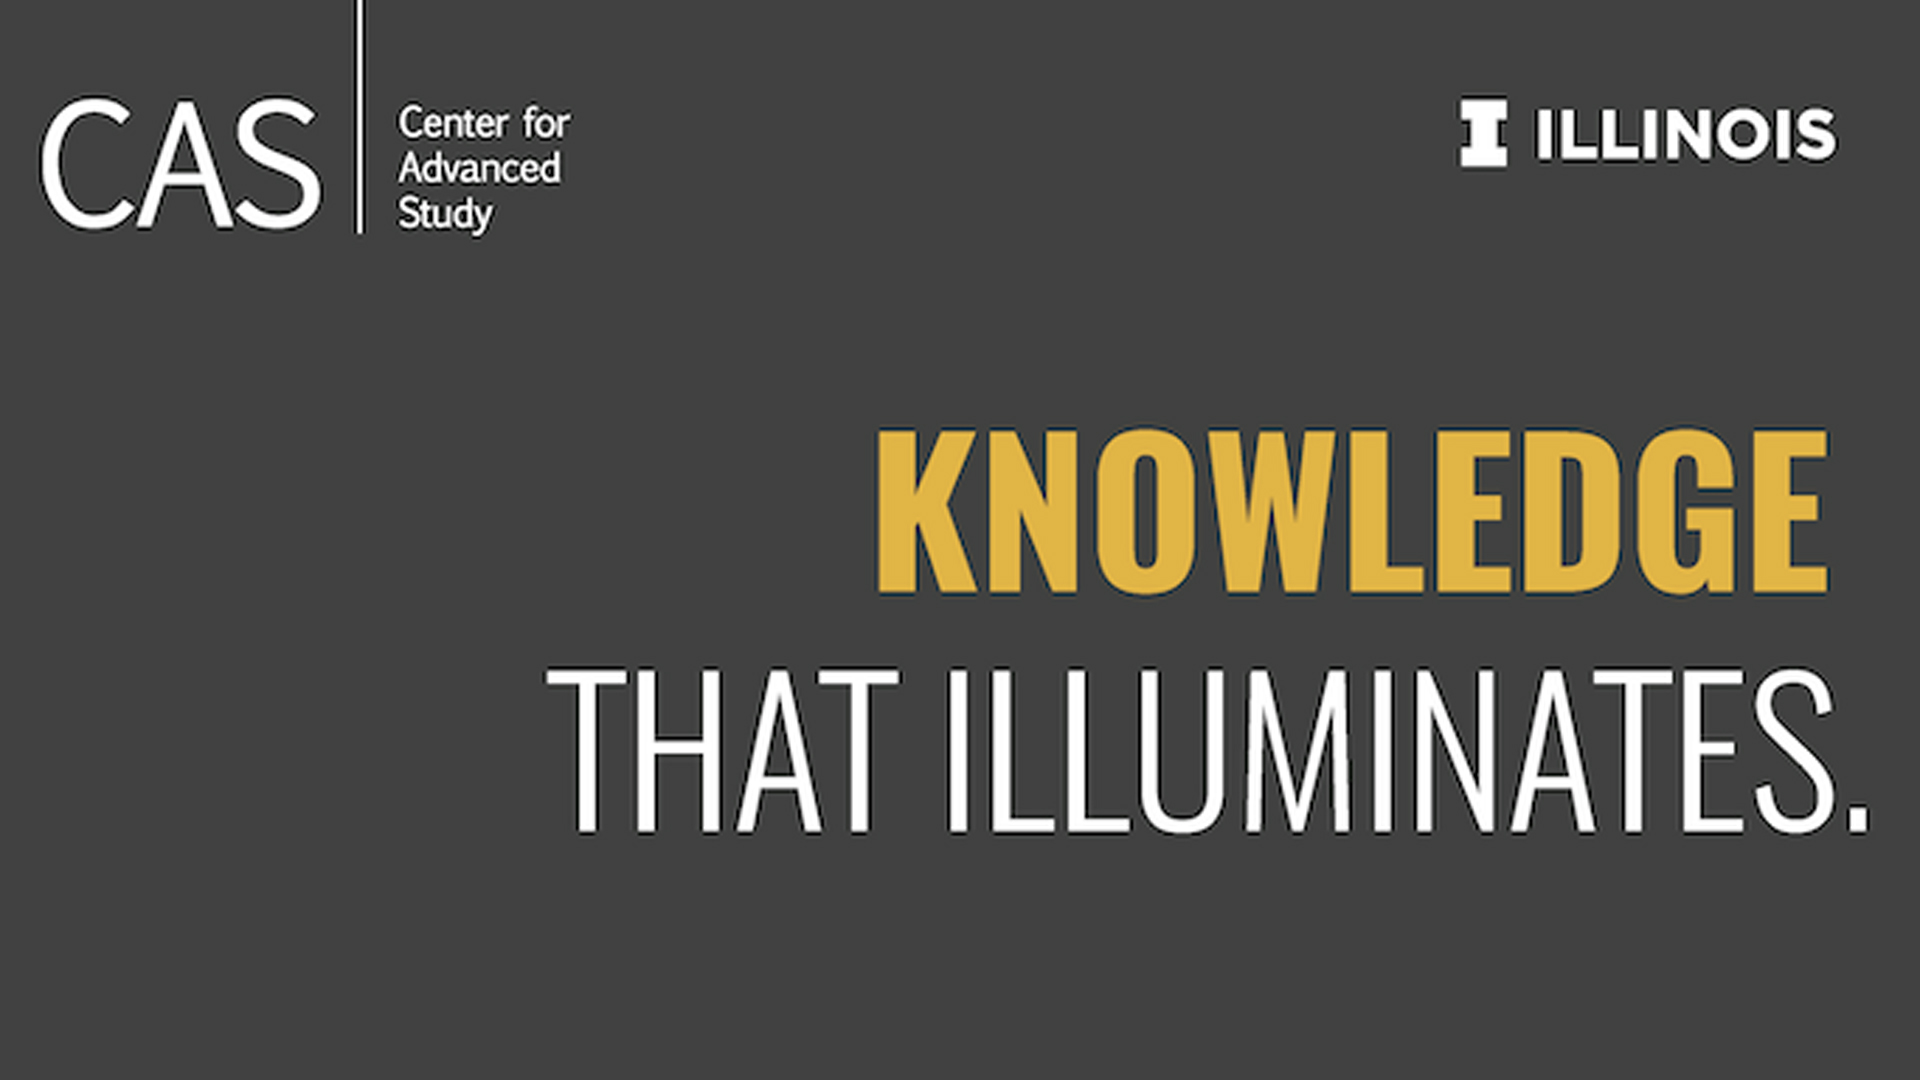 Yellow and white text on a dark gray background that says "Knowledge that Illuminates, Center for Advance Study"